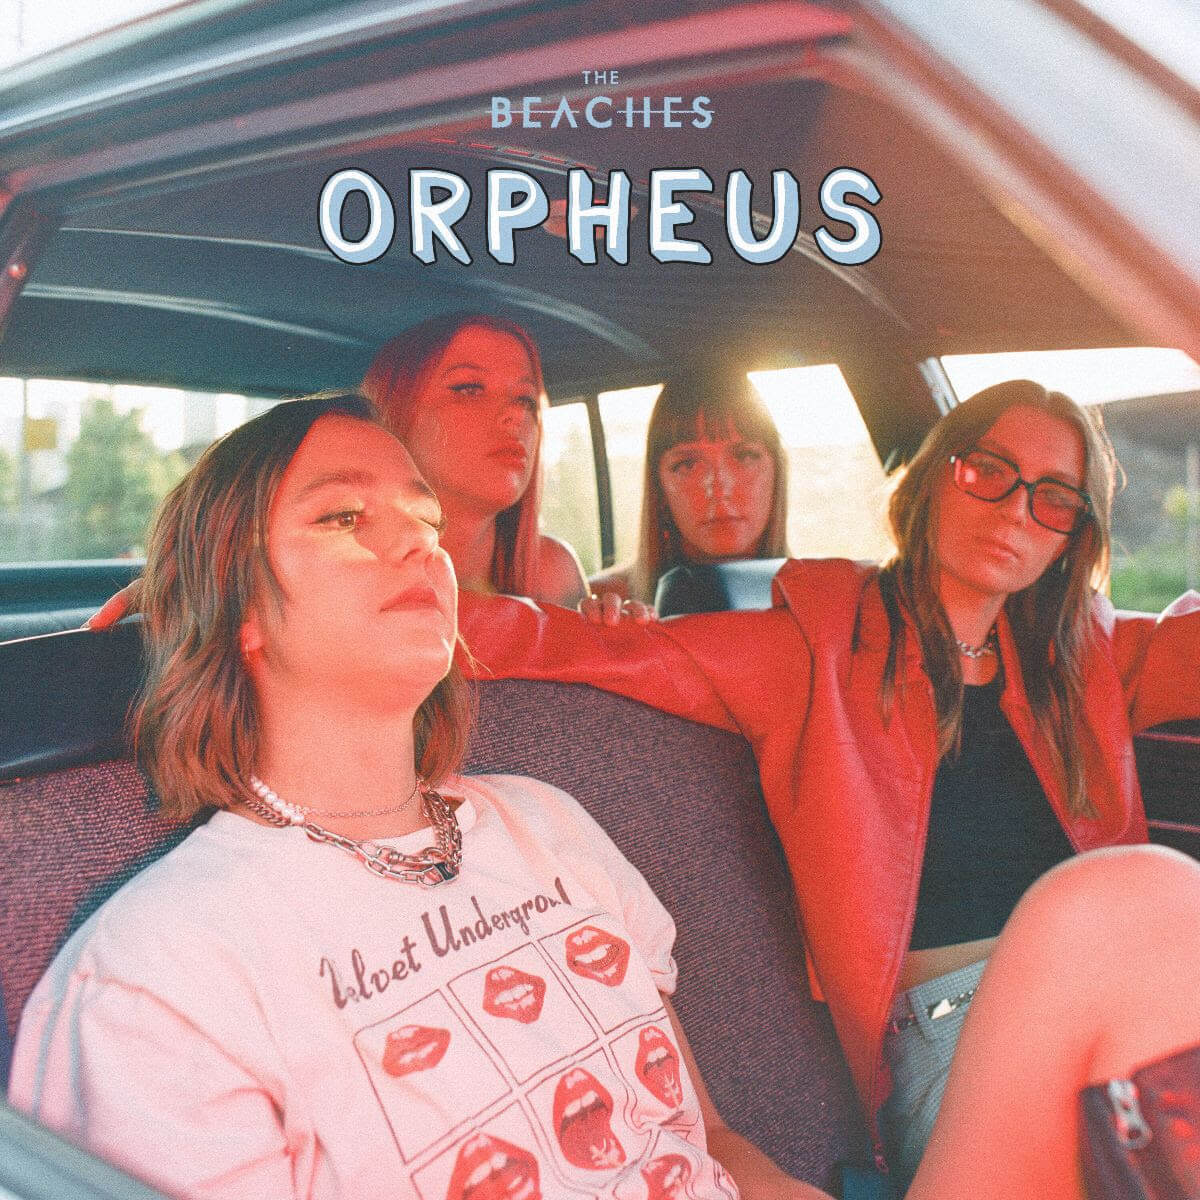 "Orpheus" by The Beaches is Northern Transmissions Song of the Day